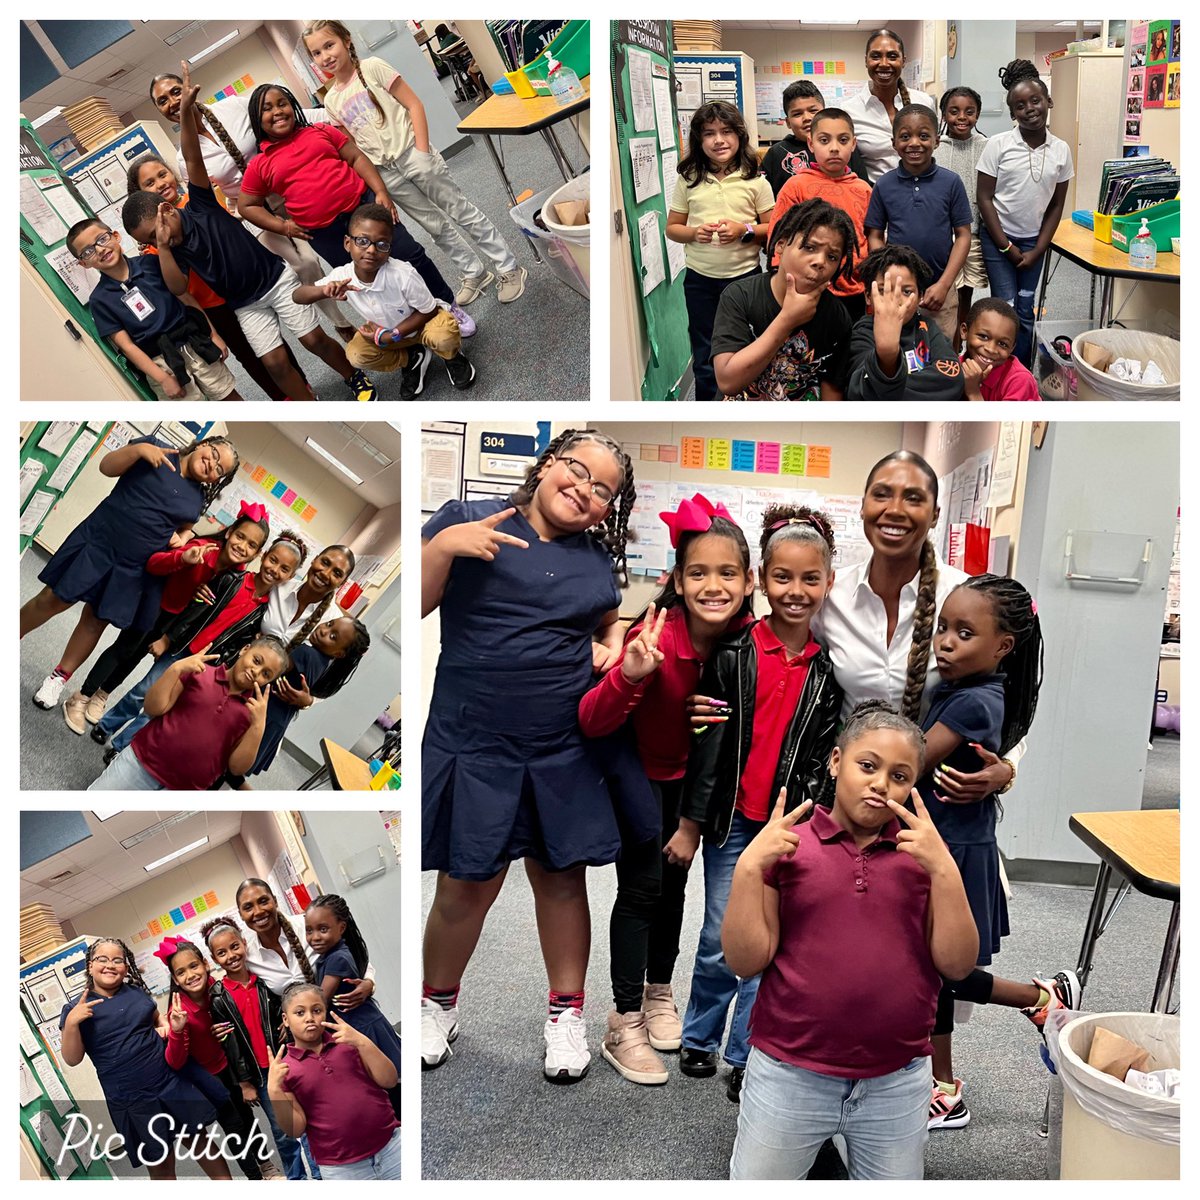 The antics!! 😂😂😂 Mrs. Strauss’ class had to show me that they were all photographers or soon to be influencers 😆 I had blast 💥 @OutleyE